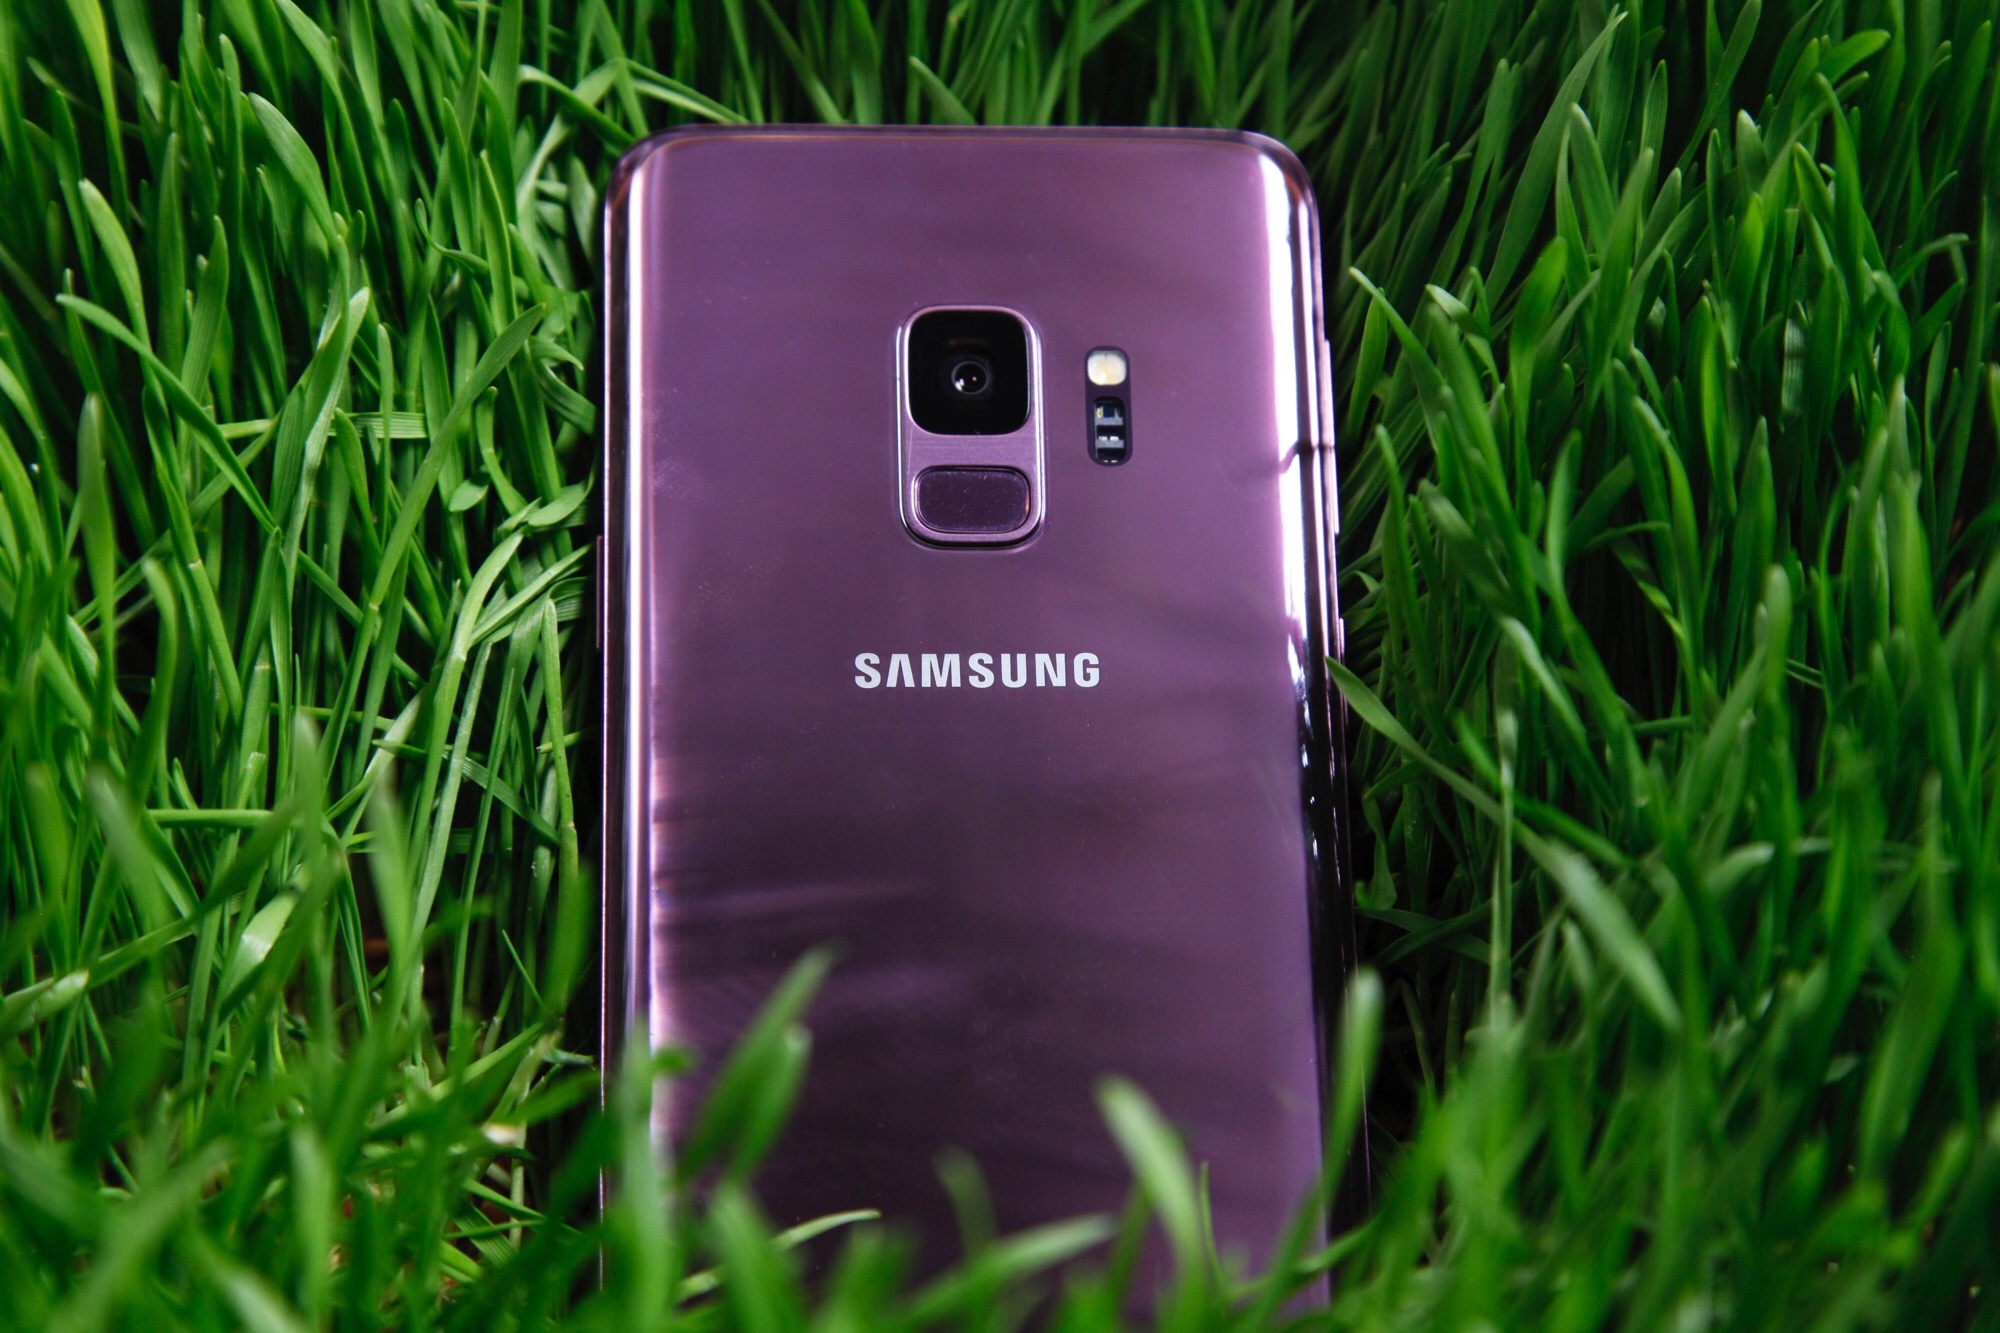 It’s here! Samsung unveils the Galaxy S9 and Galaxy S9+